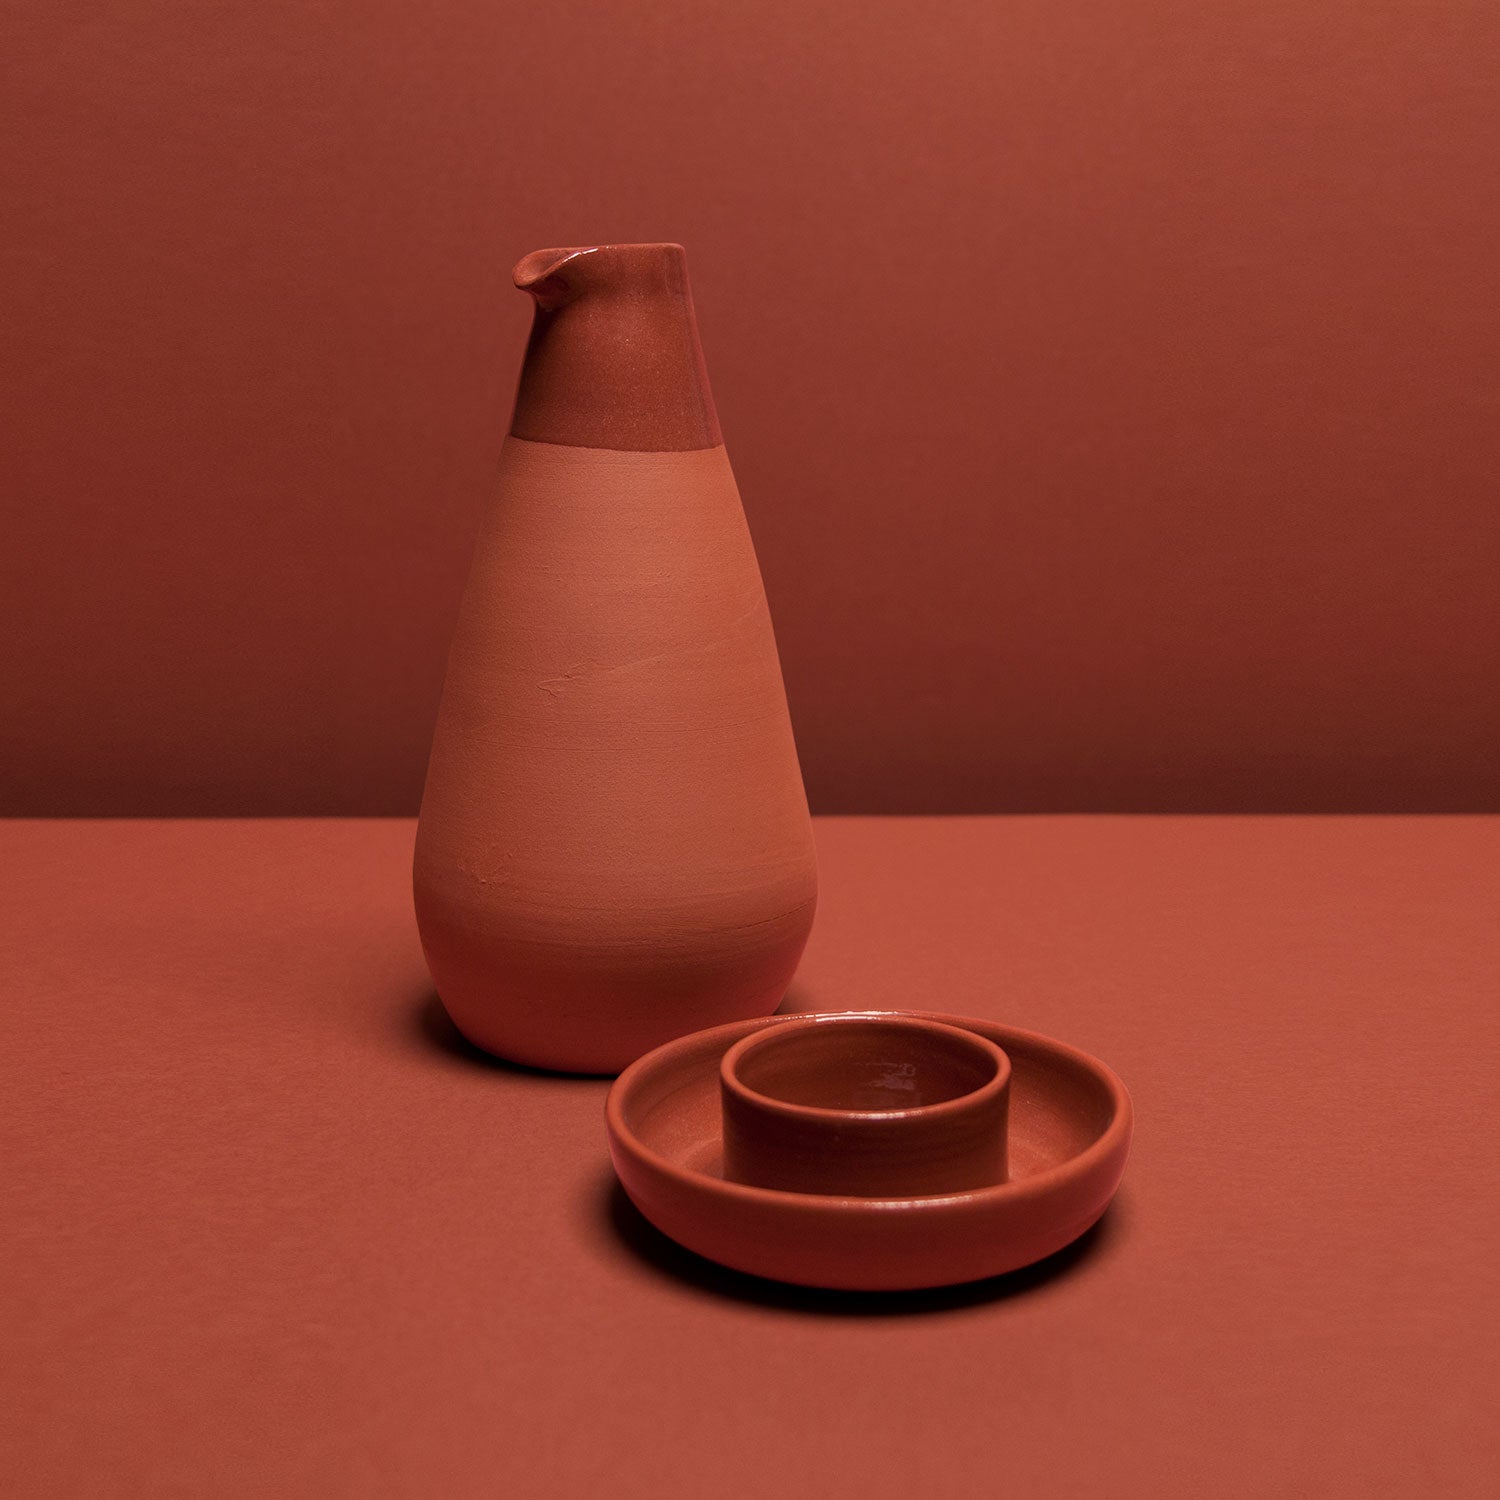 Bajouca pitcher and olive dish are terracotta pieces designed by Luis Nascimento for Tasco collection by Vicara